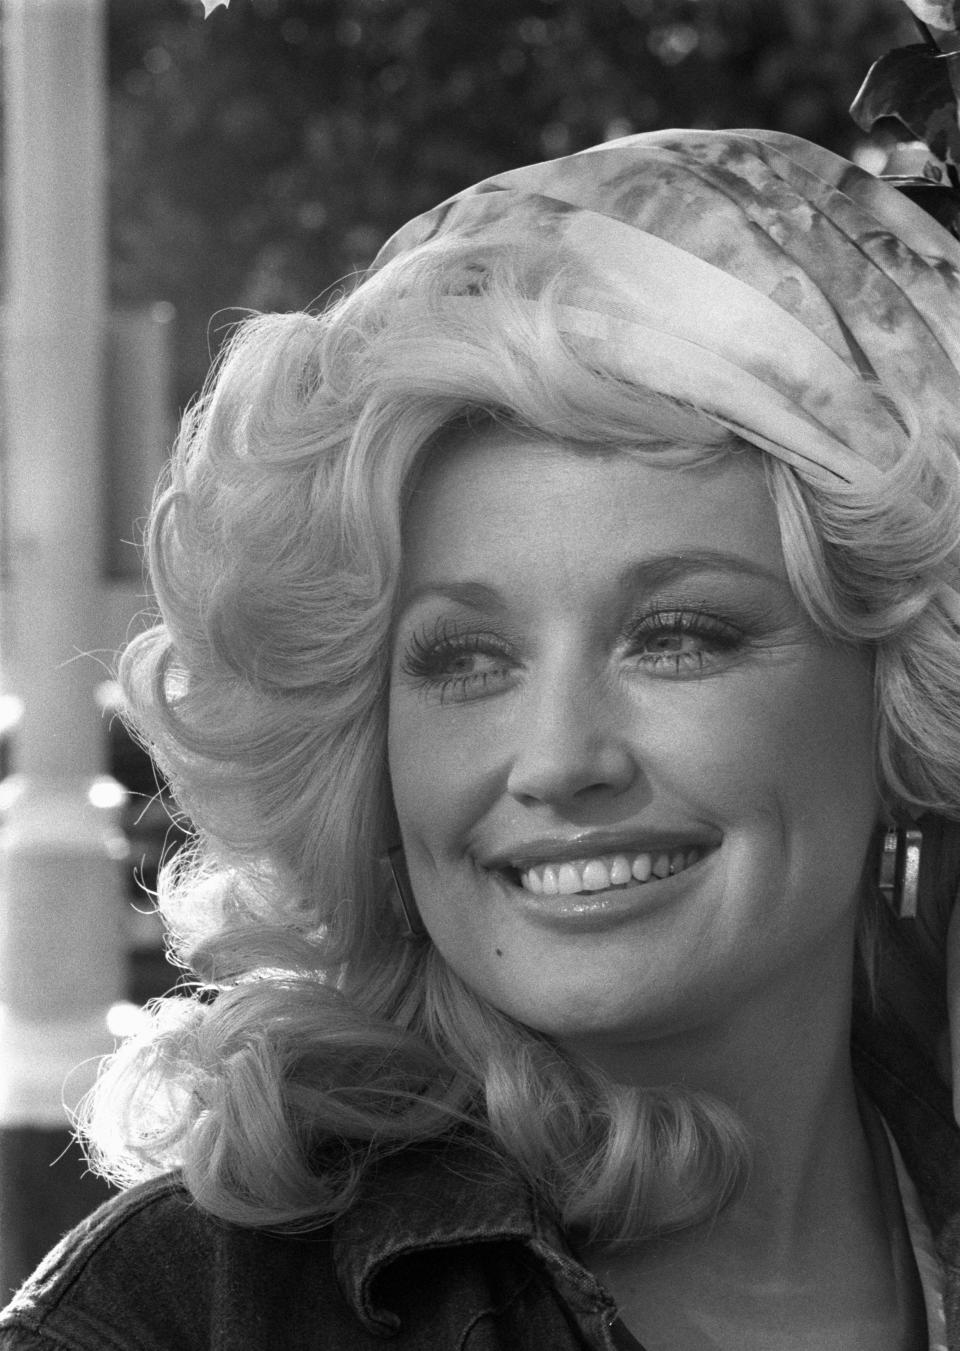 Dolly Parton at a press reception at the Hilton Hotel, London, 1976. (Photo by Vincent McEvoy/Redferns)